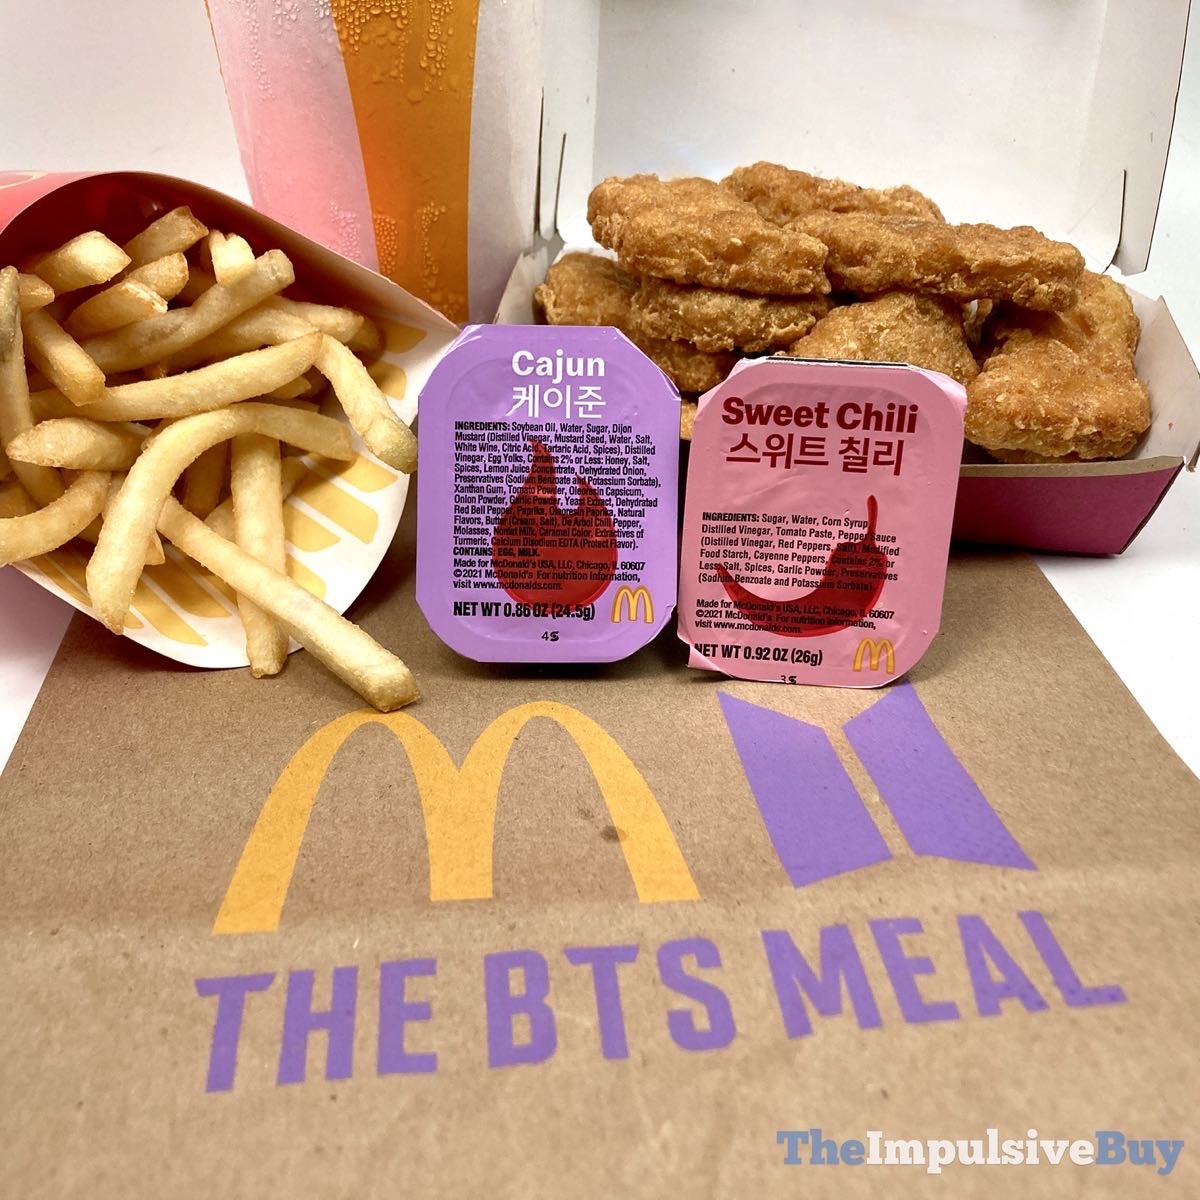 Bts meal price